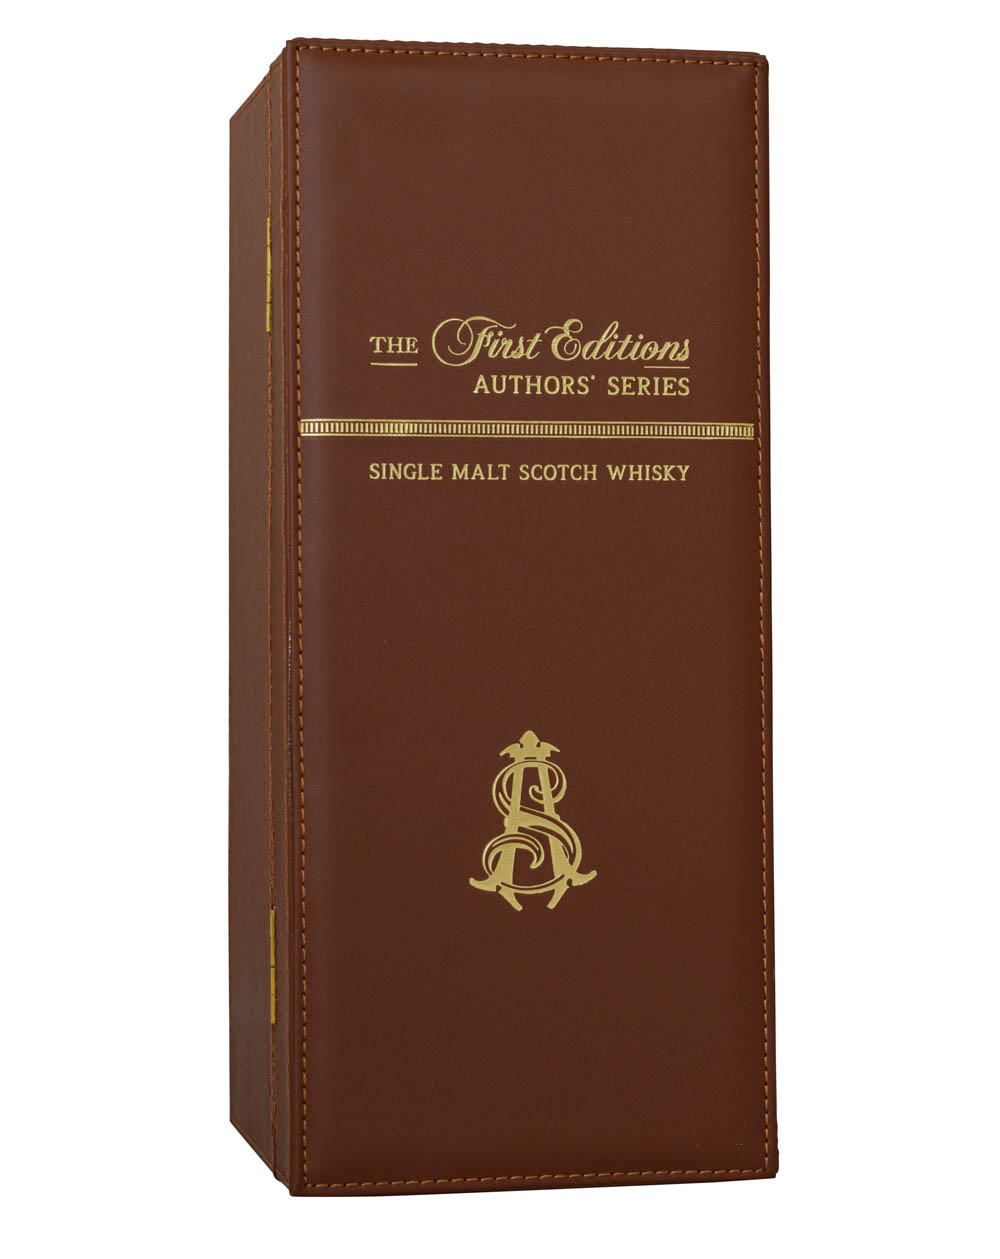 The First Editions Author's Series Box Musthave Malts MHM